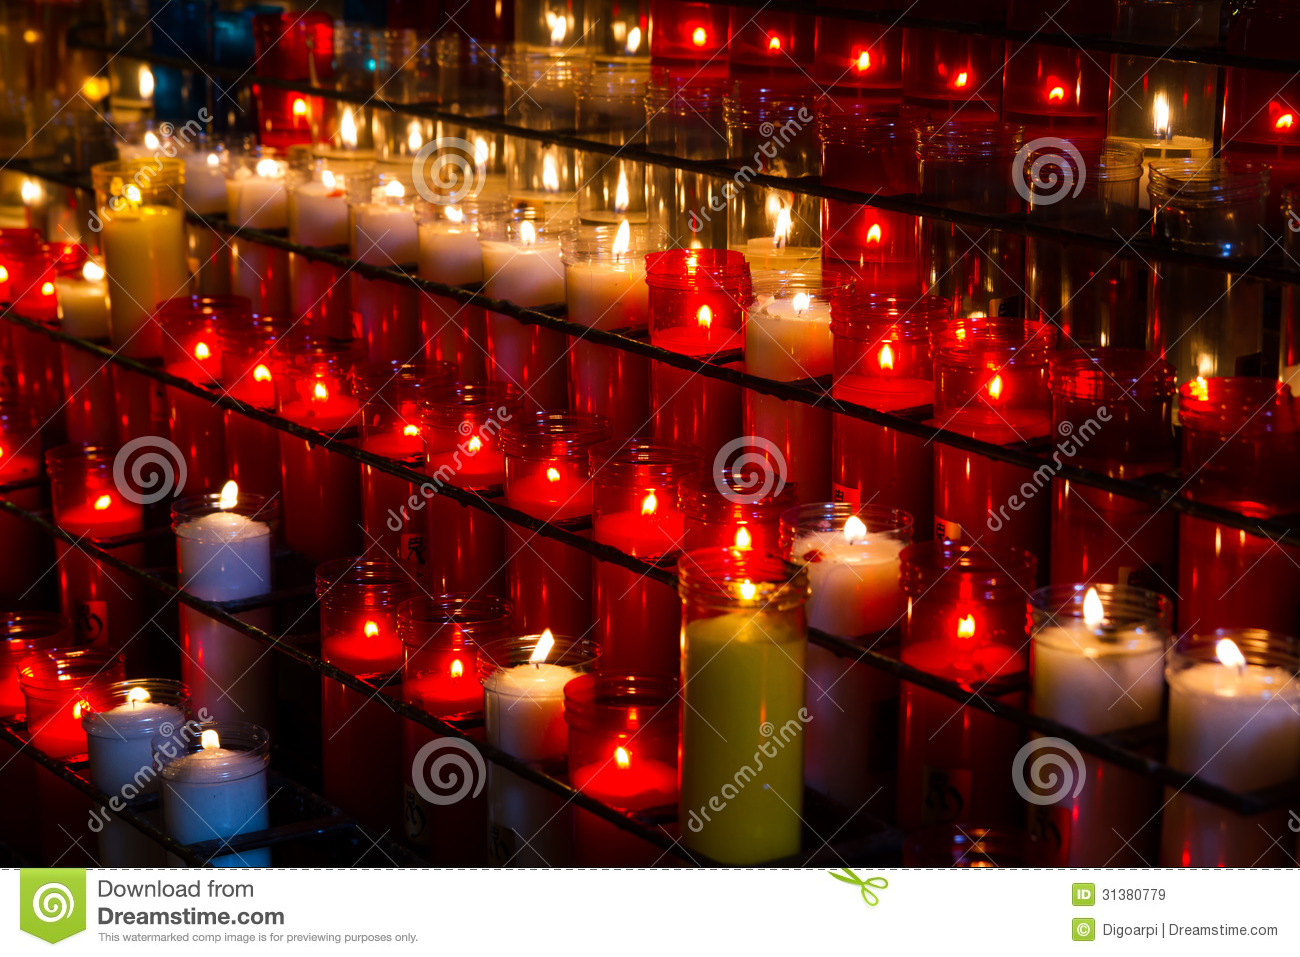 Candles Royalty Free Stock Images   Image  31380779